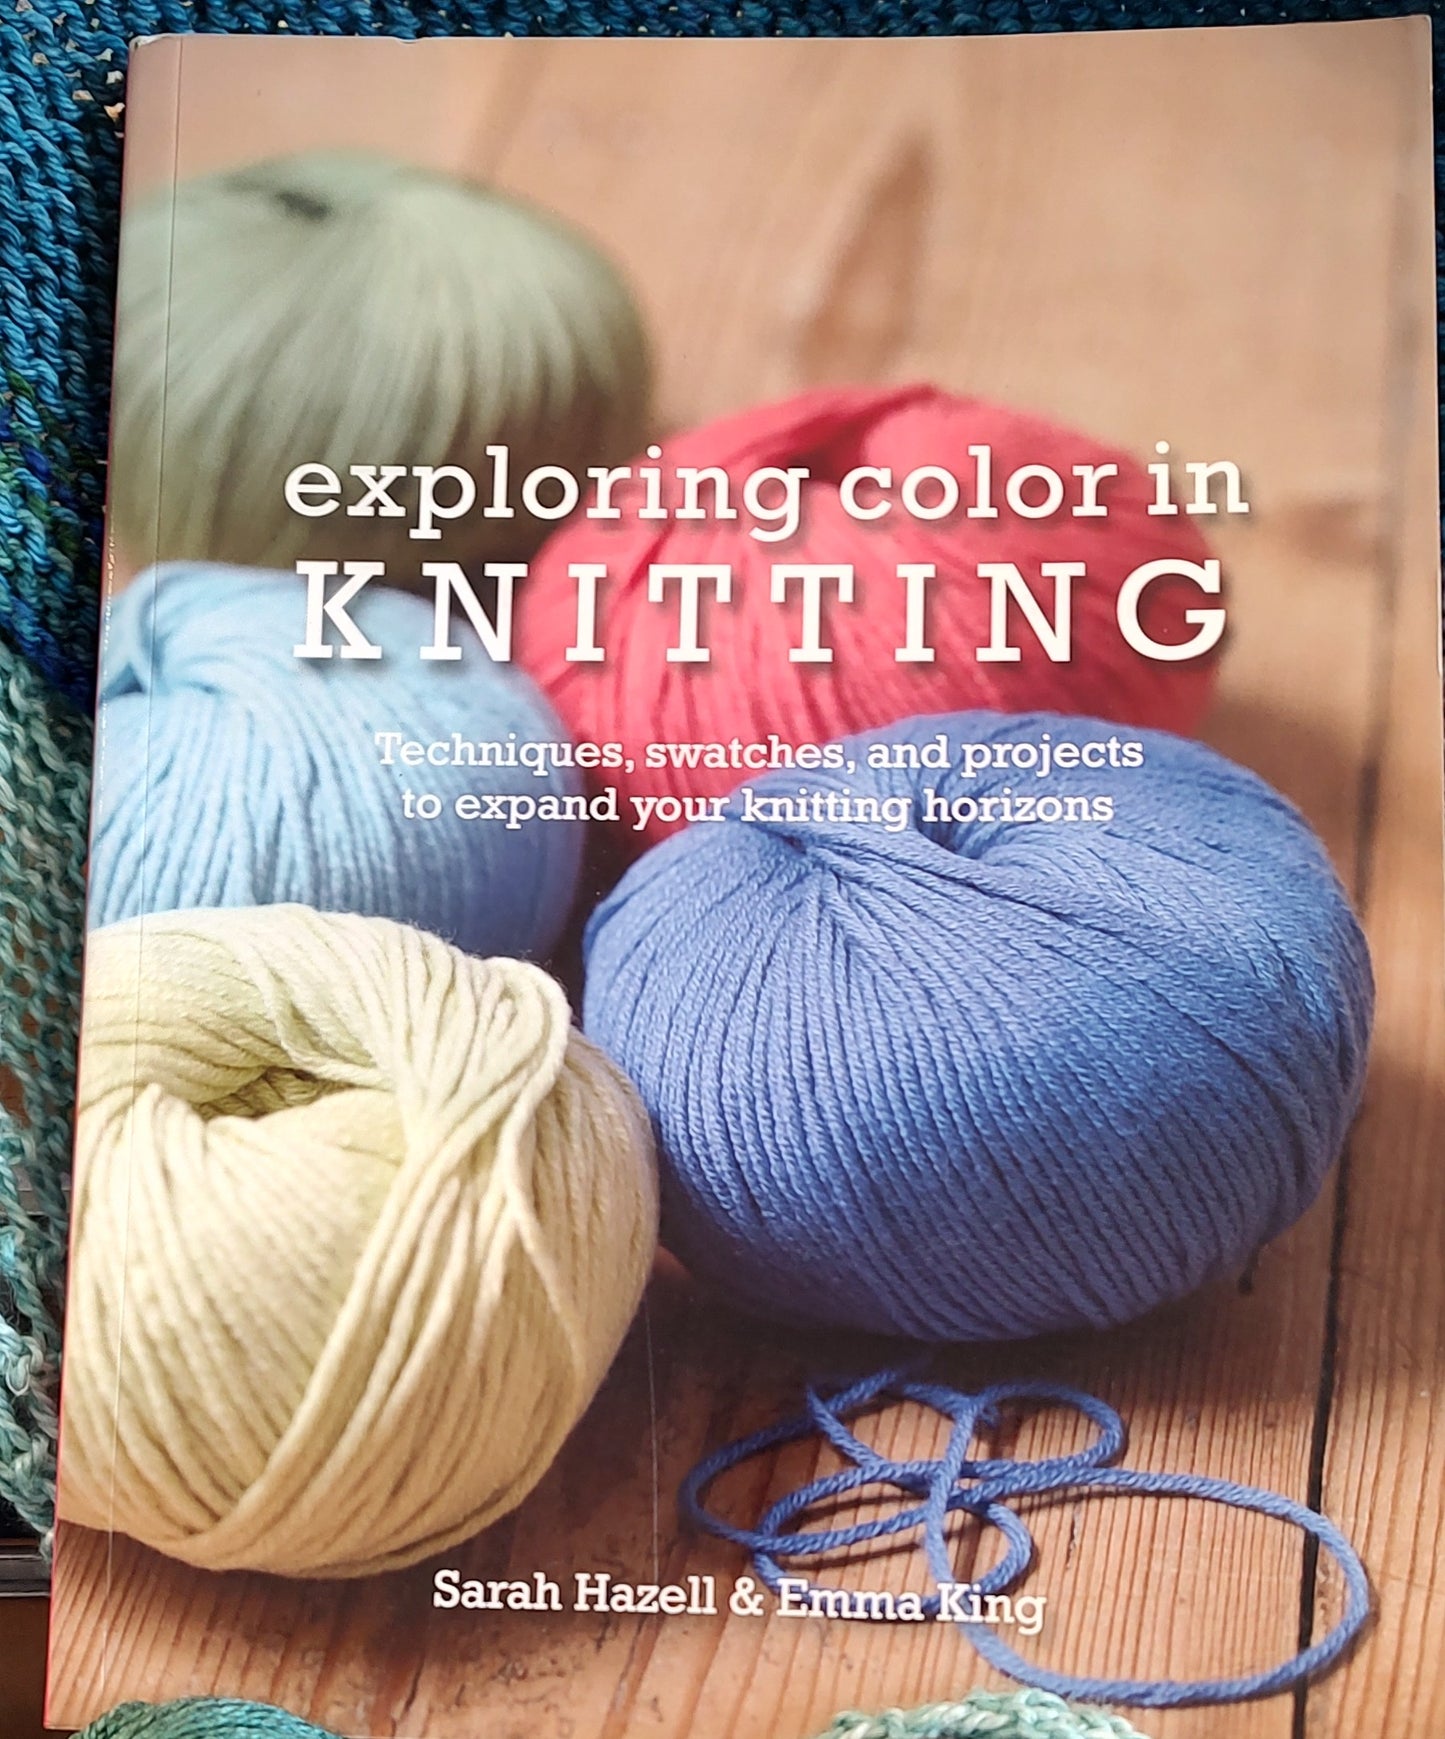 Book - Exploring Color in Knitting